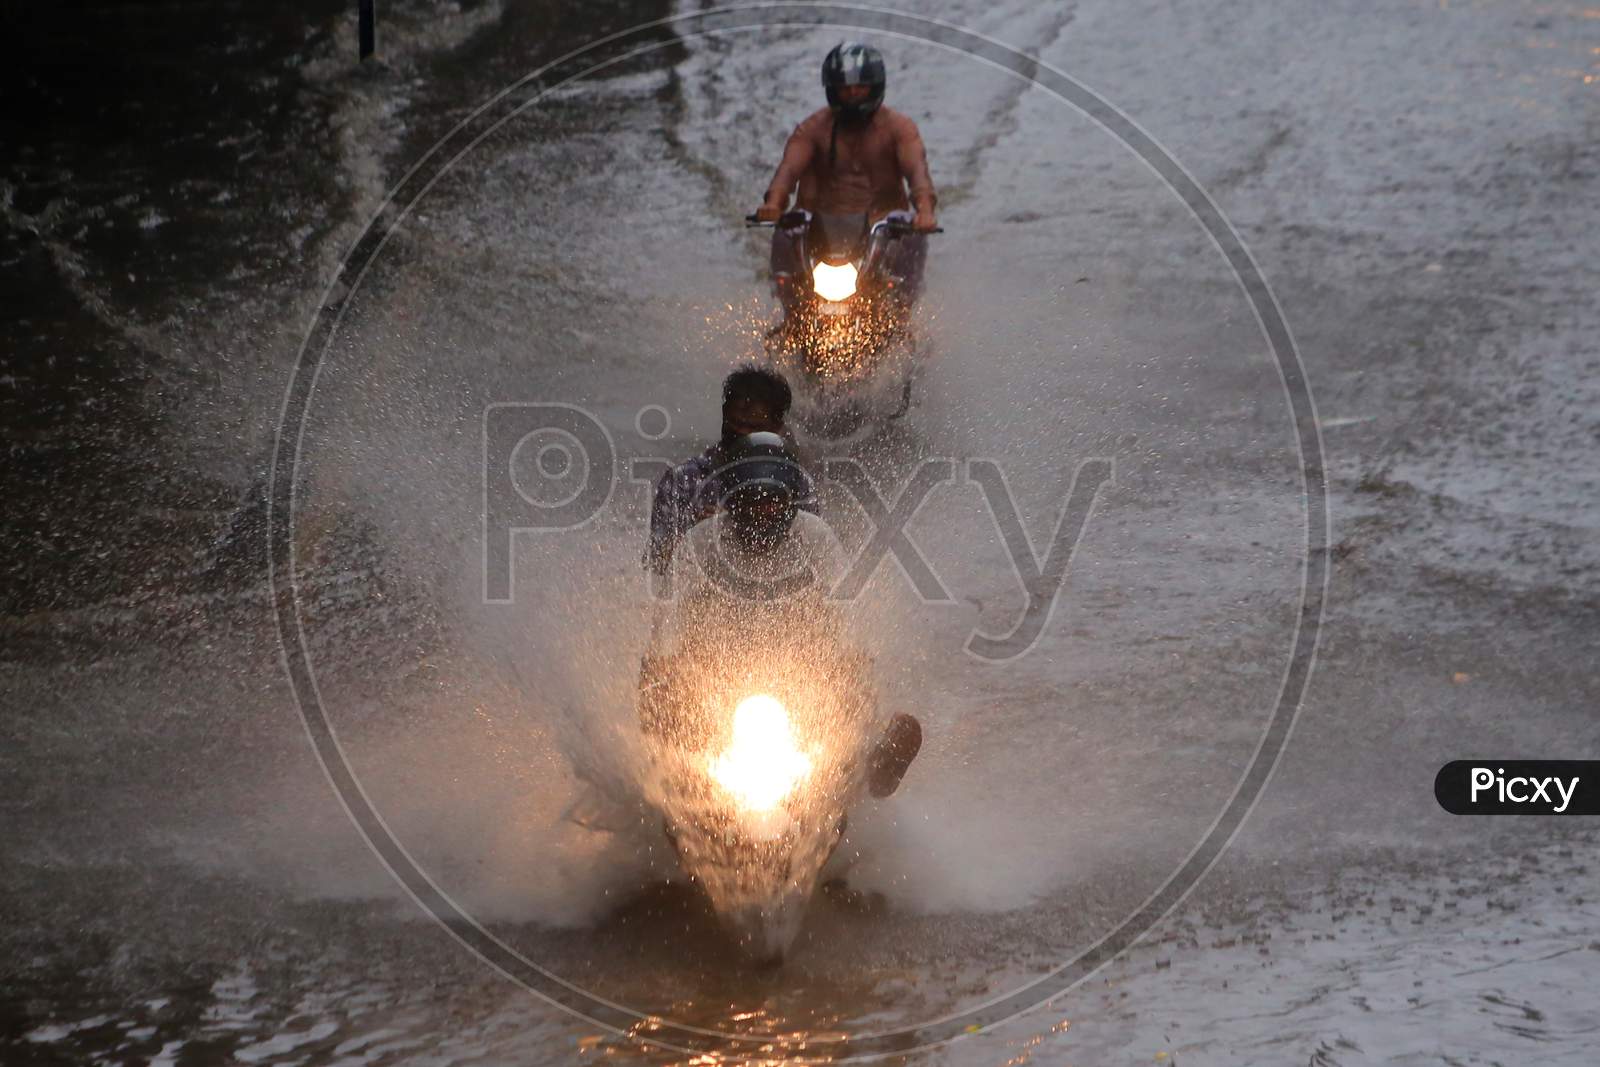 People drive through a flooded road during heavy rains in Ajmer, On August 1, 2020.